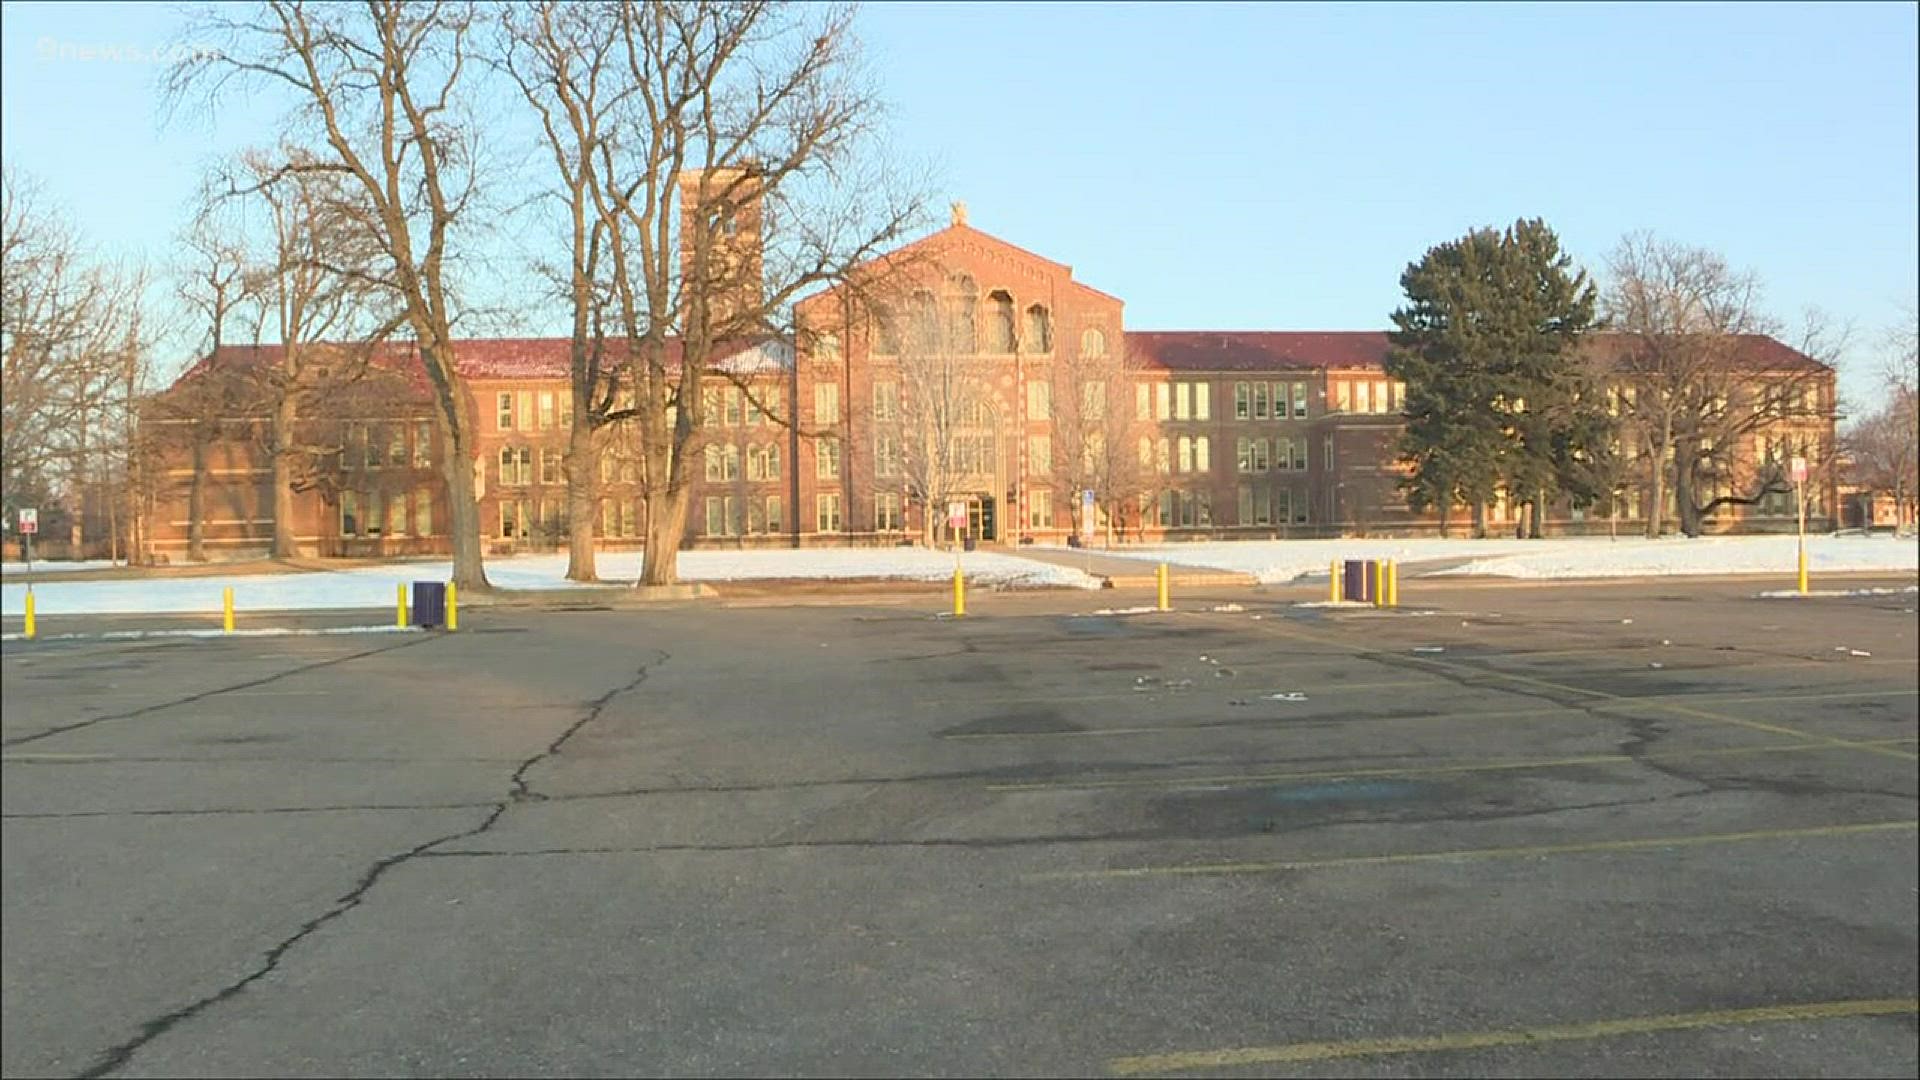 At 8 a.m. on Monday, some students at South High School will walk out of class to join teachers on the picket lines.